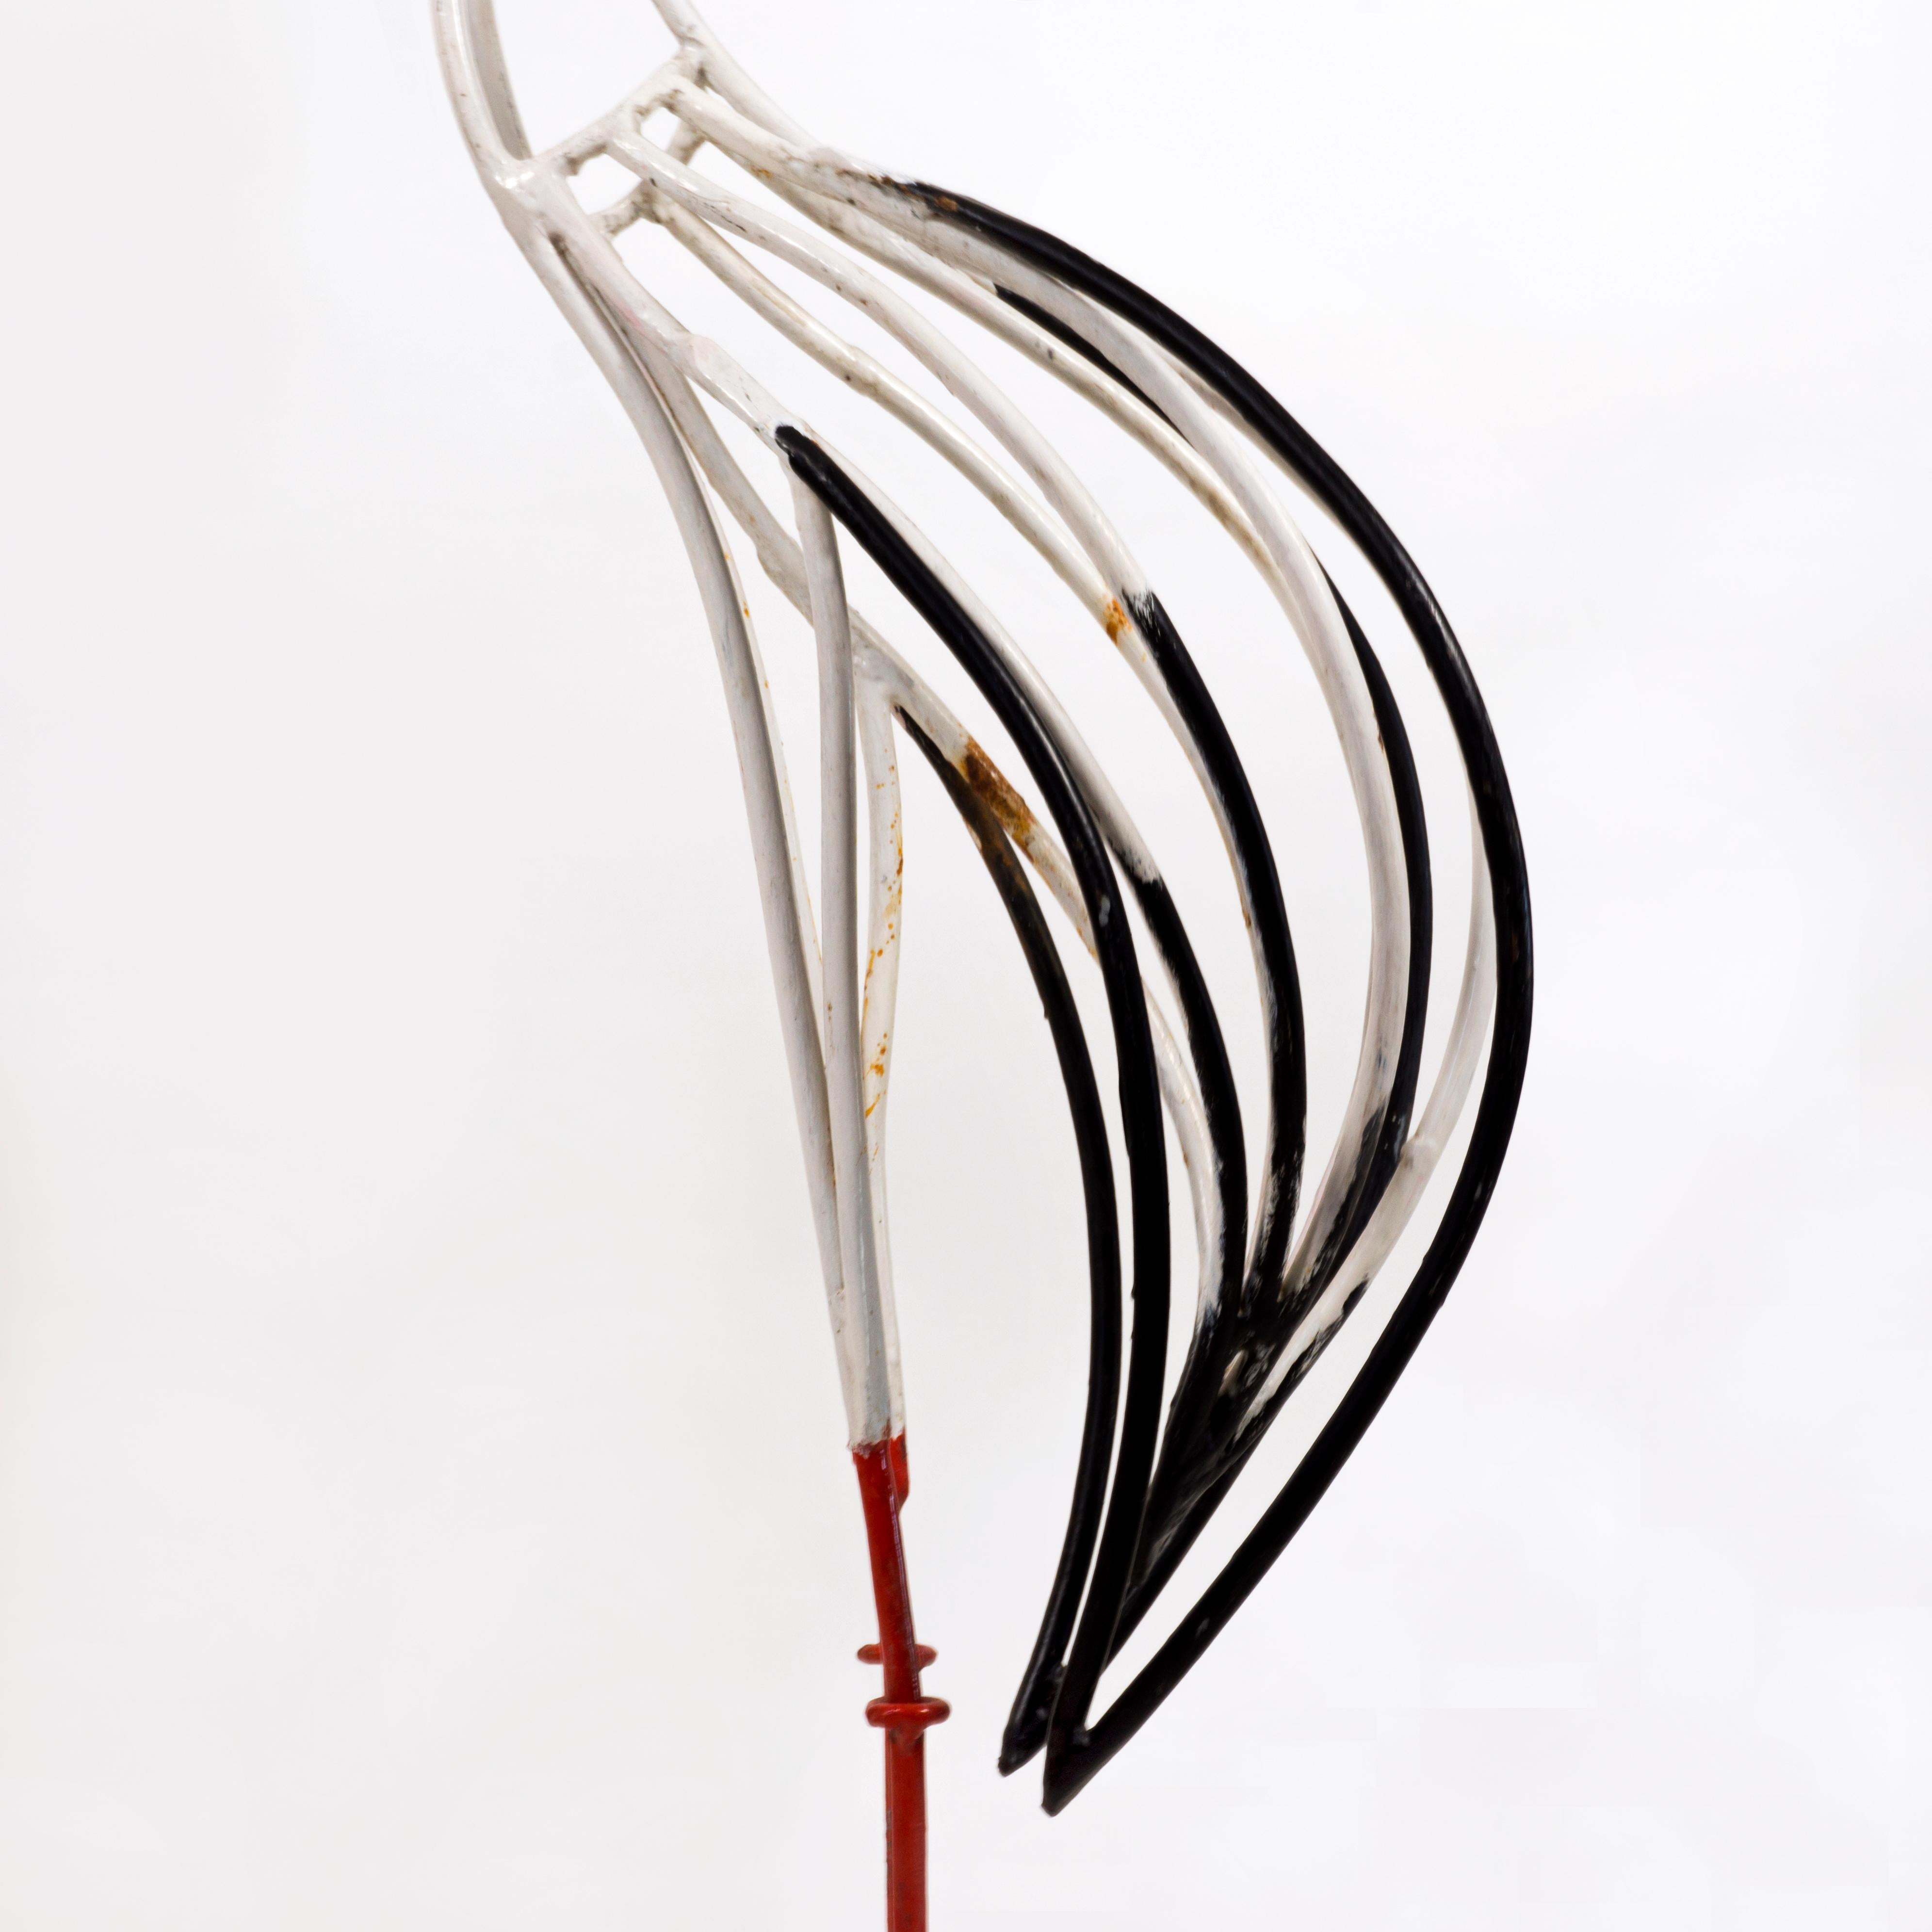 Lovely Midcentury Life-size Pair of 1950s Wrought Iron Stork Sculptures For Sale 4